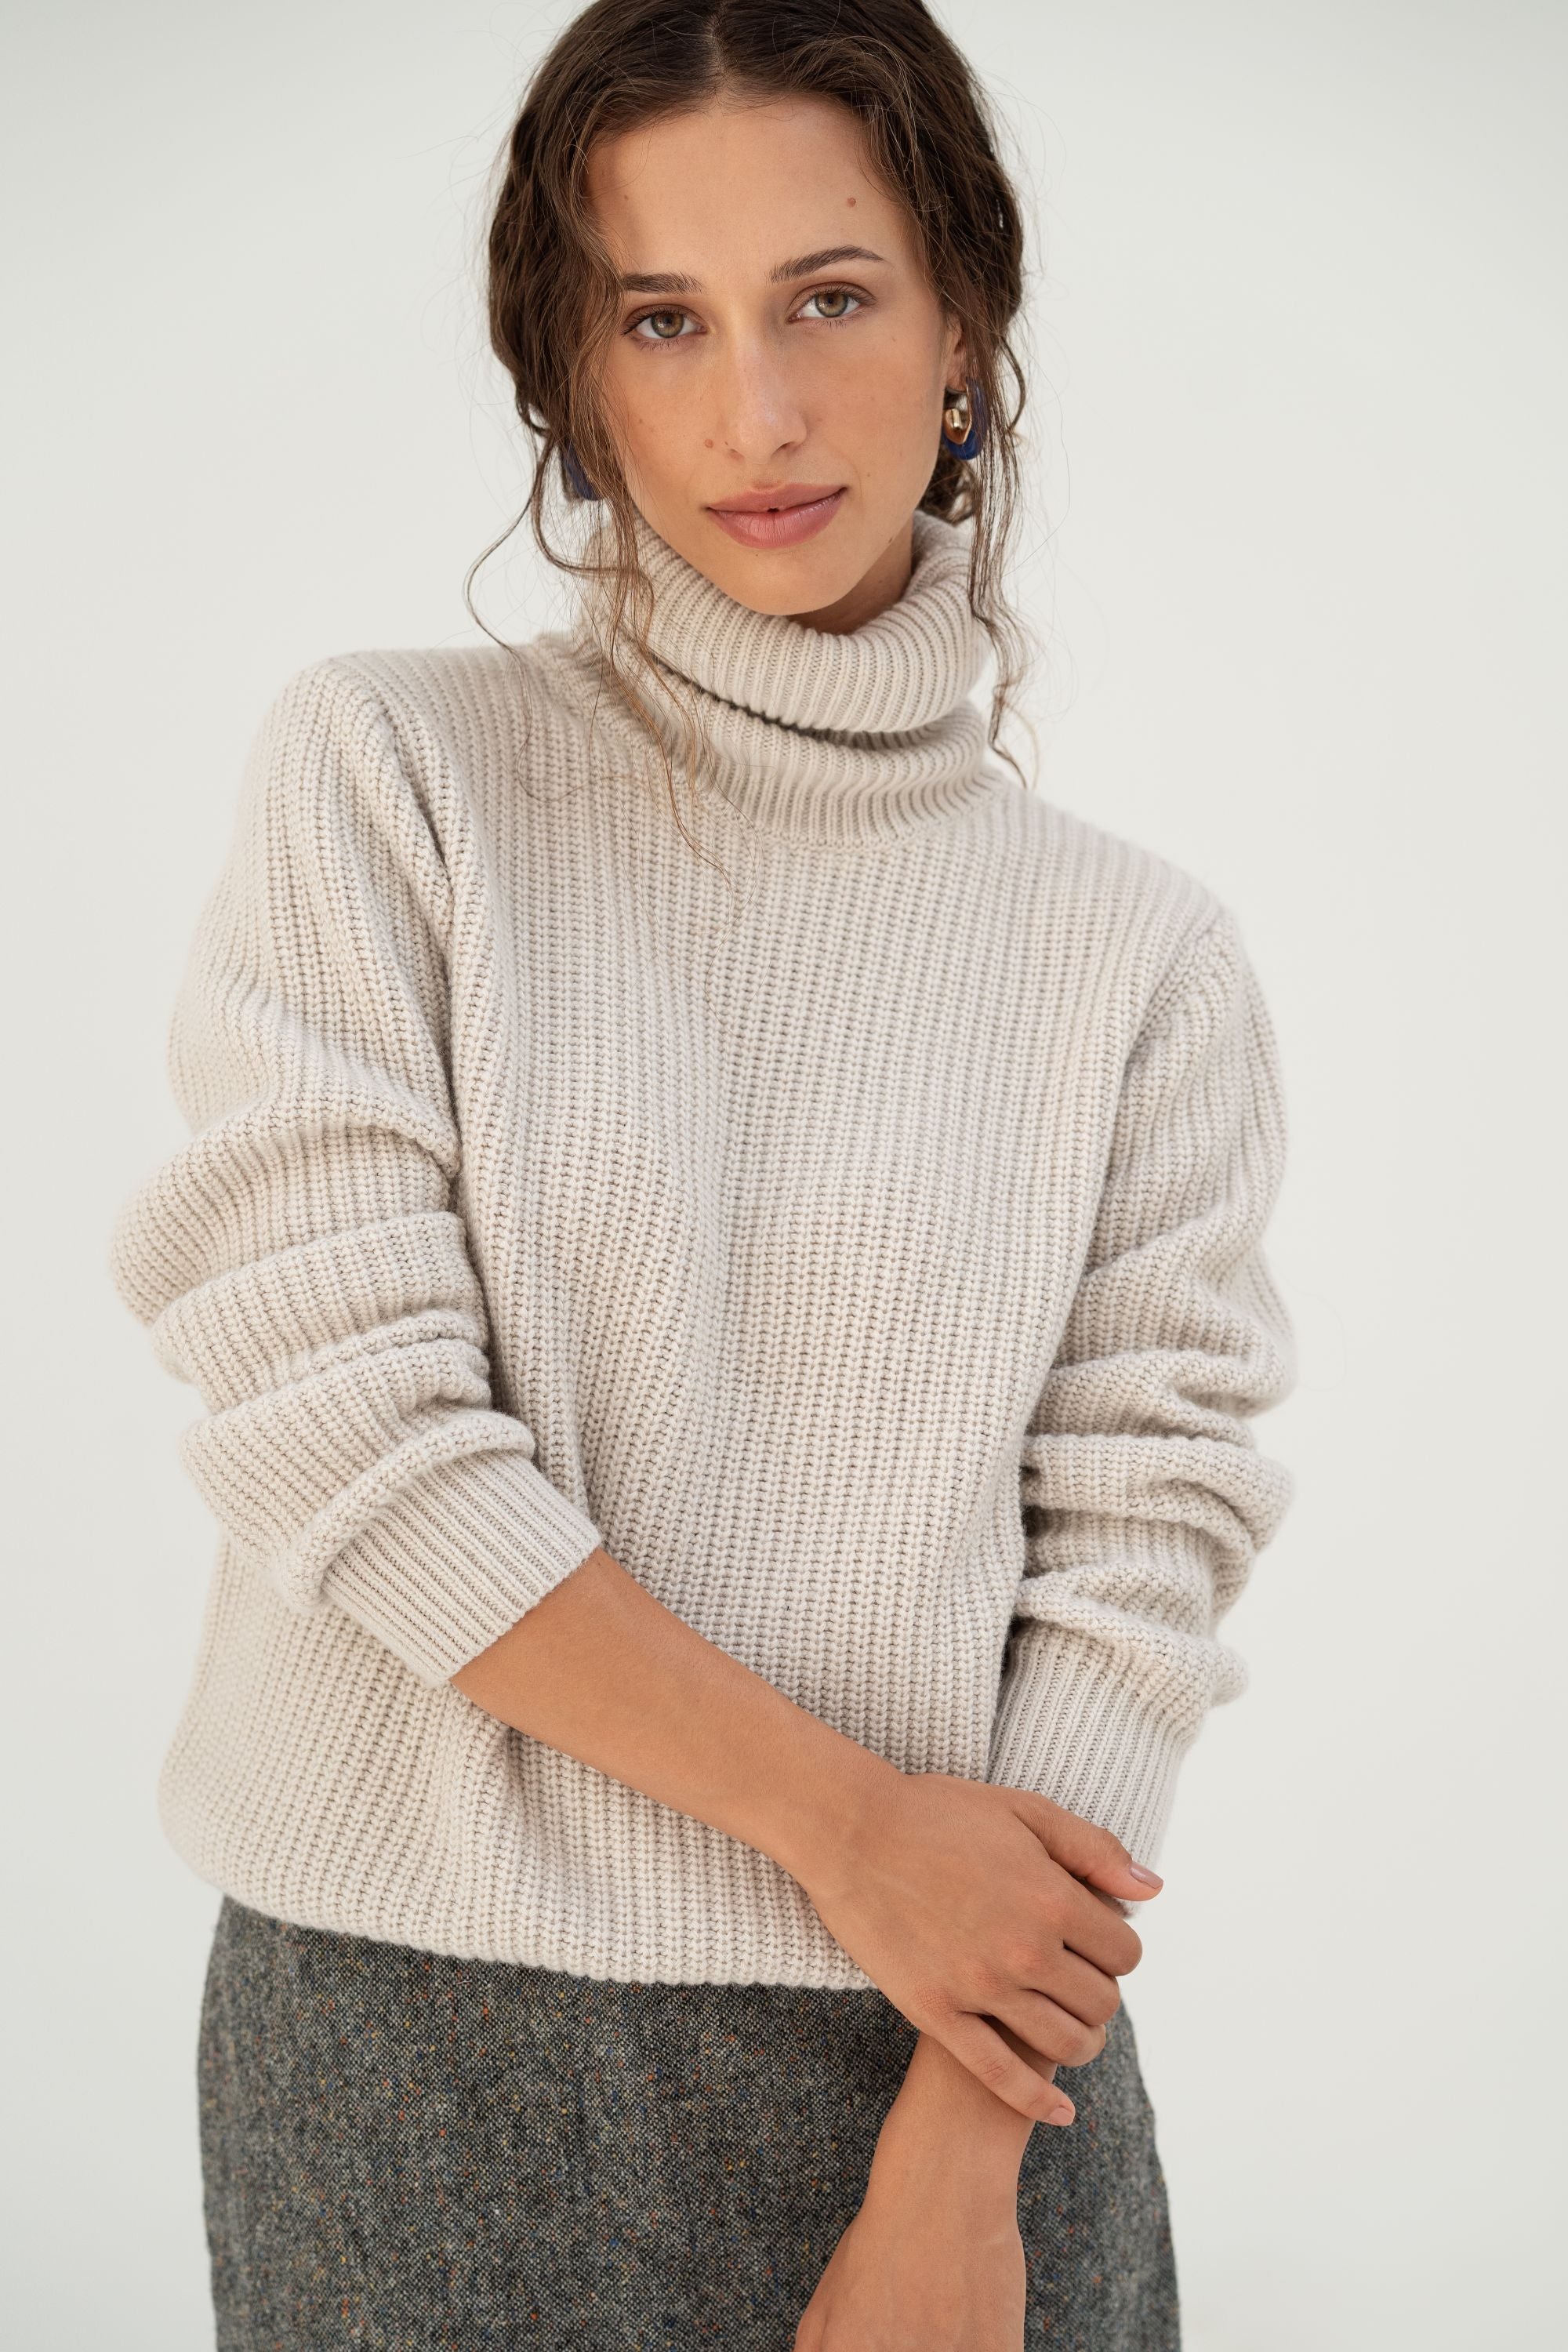 Naz women's turtleneck sweater made from 100% recycled fibers in white. 